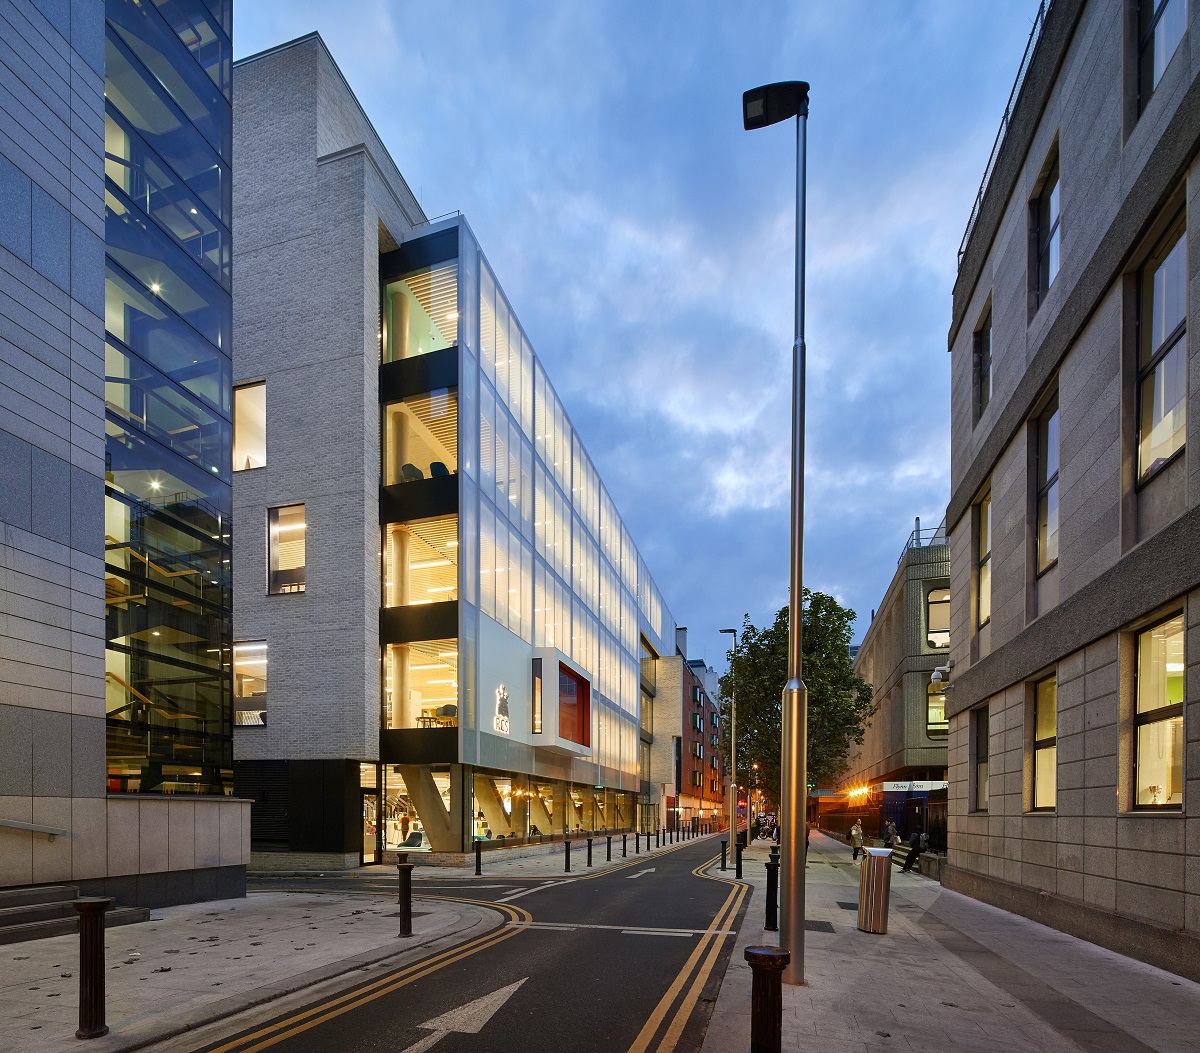 Campus update: RCSI city centre buildings will close early this evening as a precautionary safety measure. Teaching and assessment will finish by 5pm and all staff and students are asked to make their way home safely at that time, or before then, where possible.